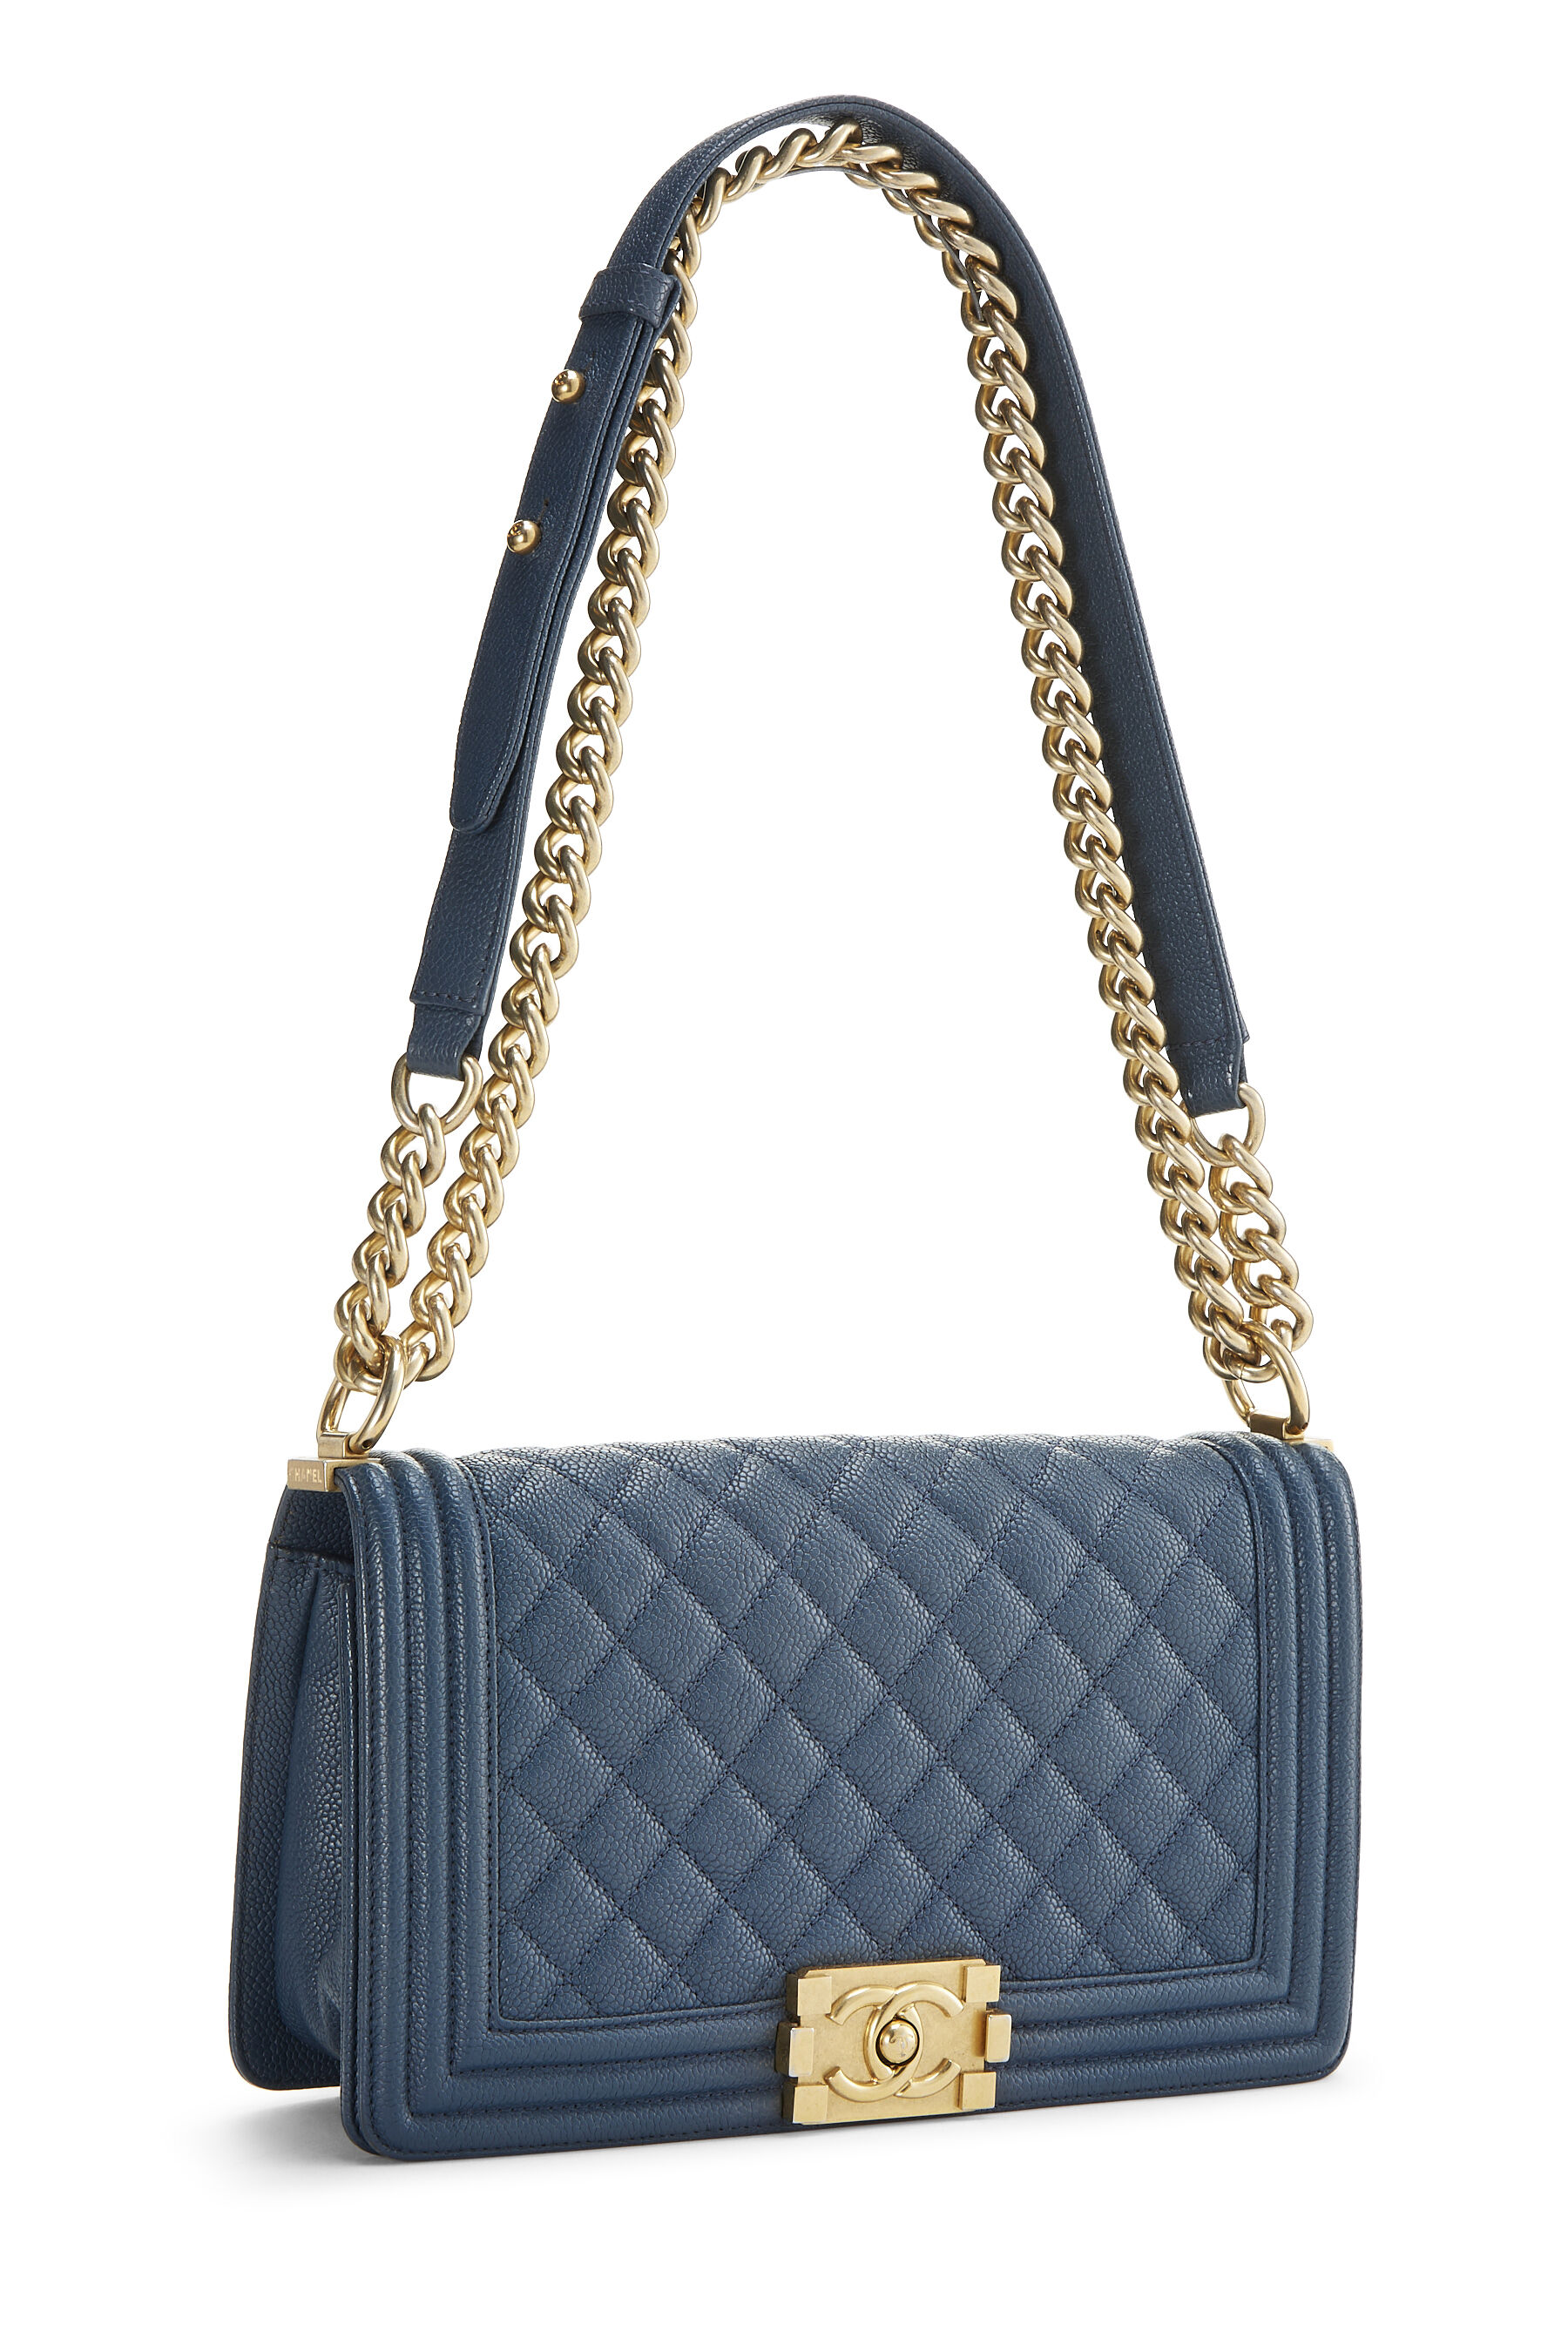 Chanel Quilted Caviar Boy Bag